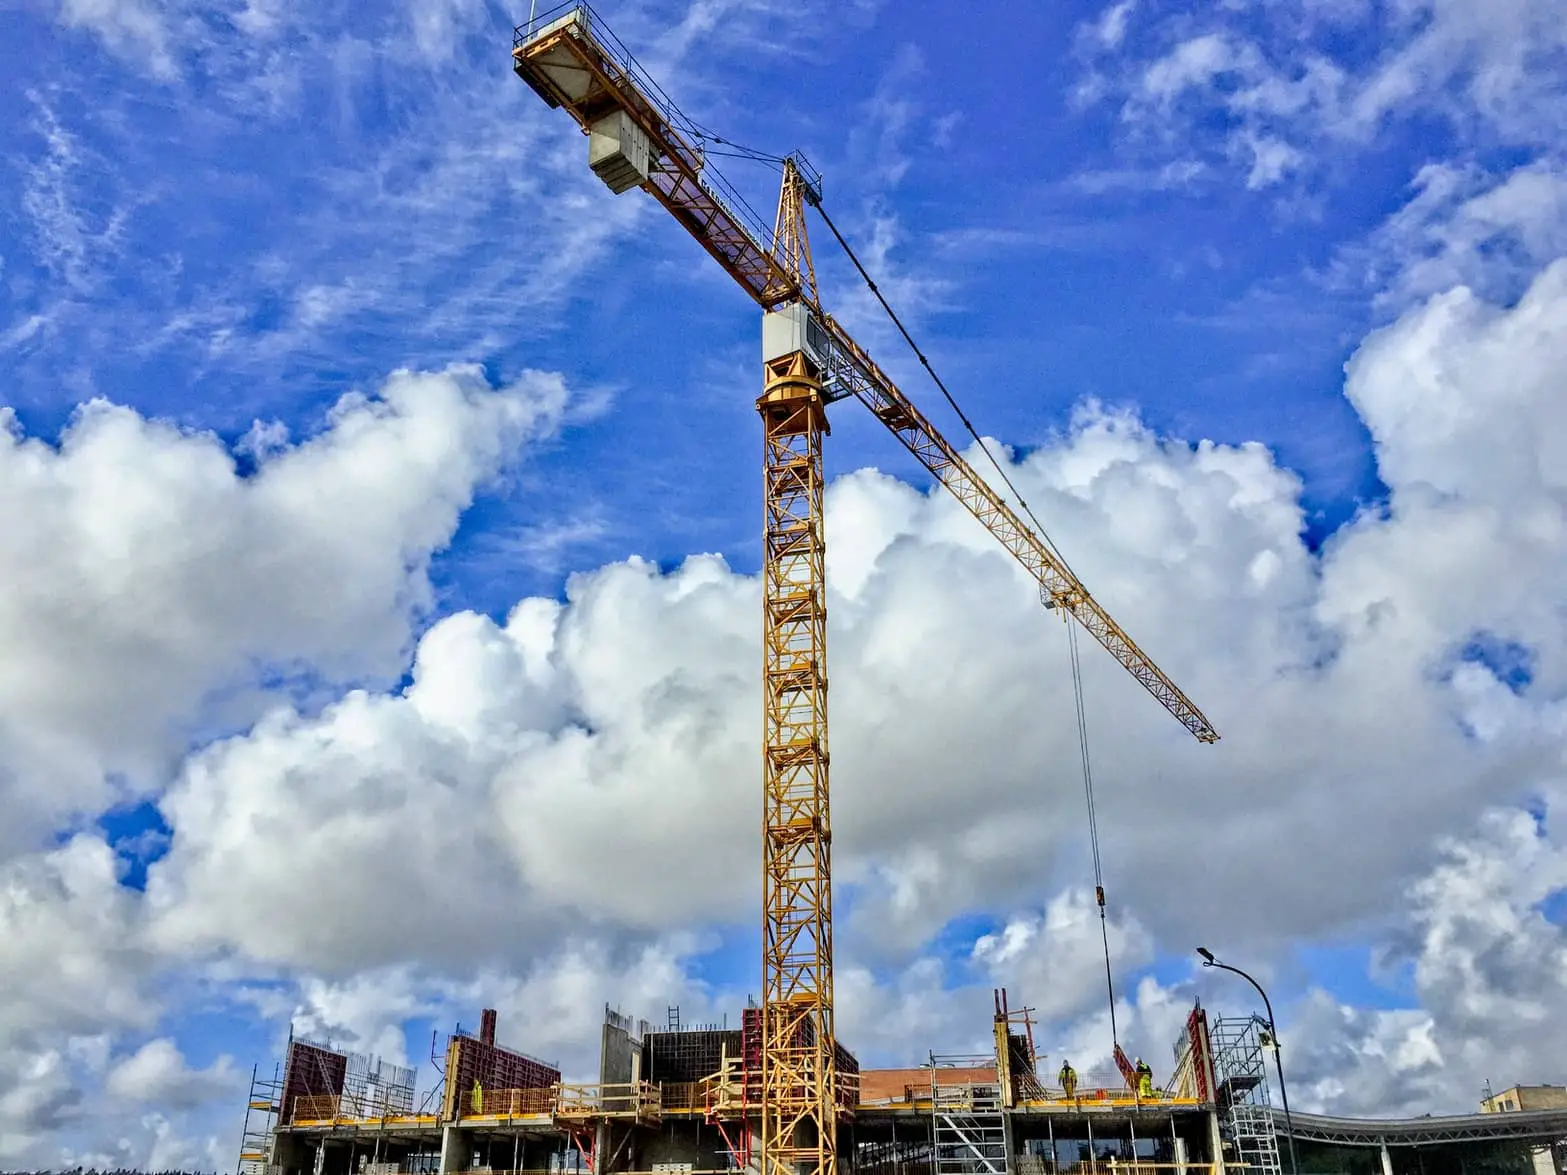 crane above building site with blue sky in background